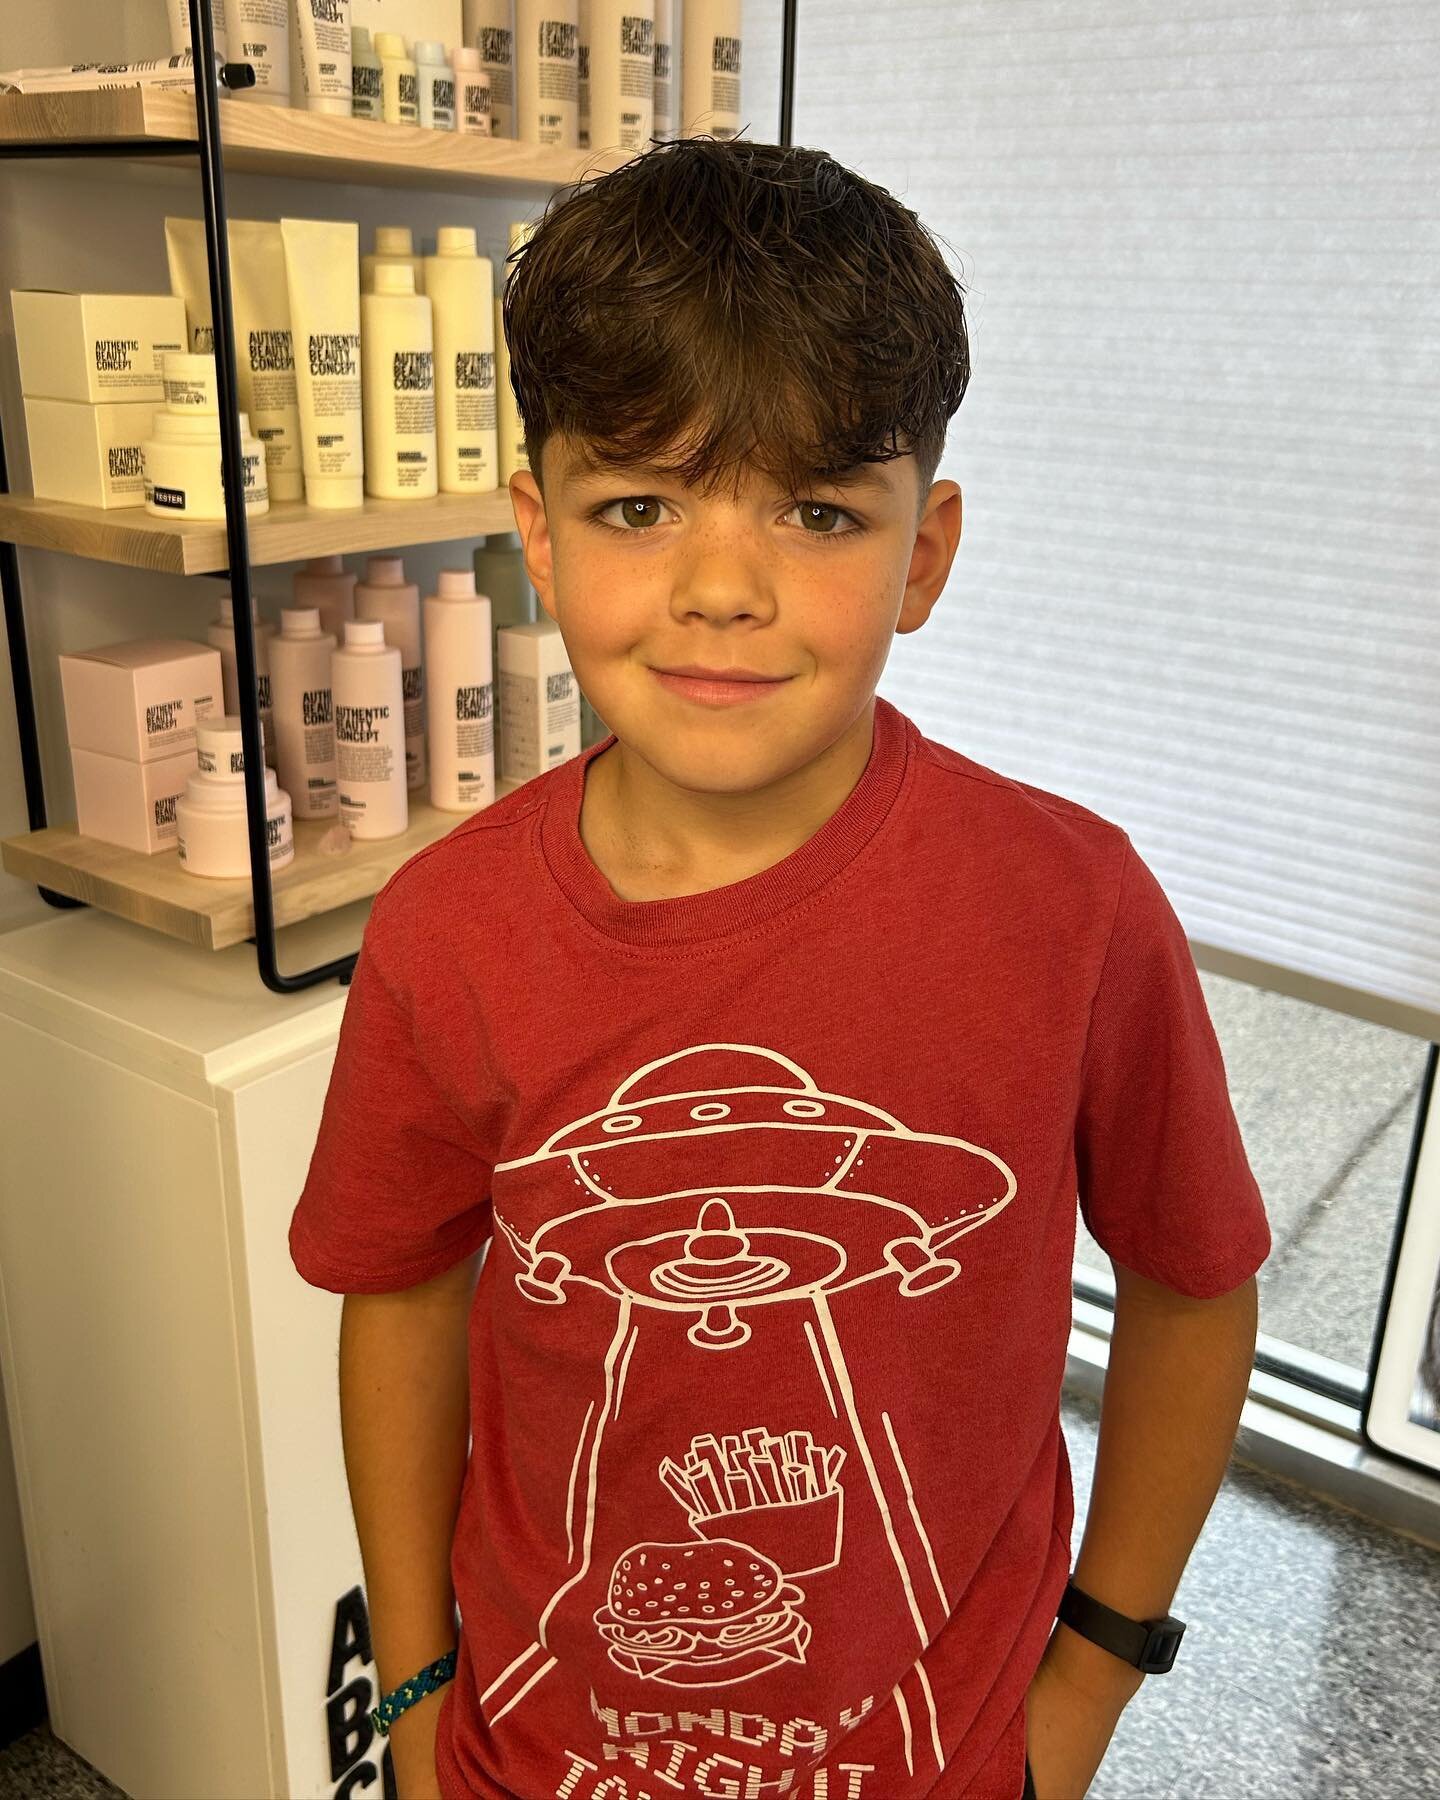 New cut, same adorable smile! 

Meet Emmett, the cutest kid who just got a fresh haircut! With this stylish cut, Emmett is ready to walk into summer with nothing but a smile on his face. 

Whether he&rsquo;s playing on the playground or sharing a lau